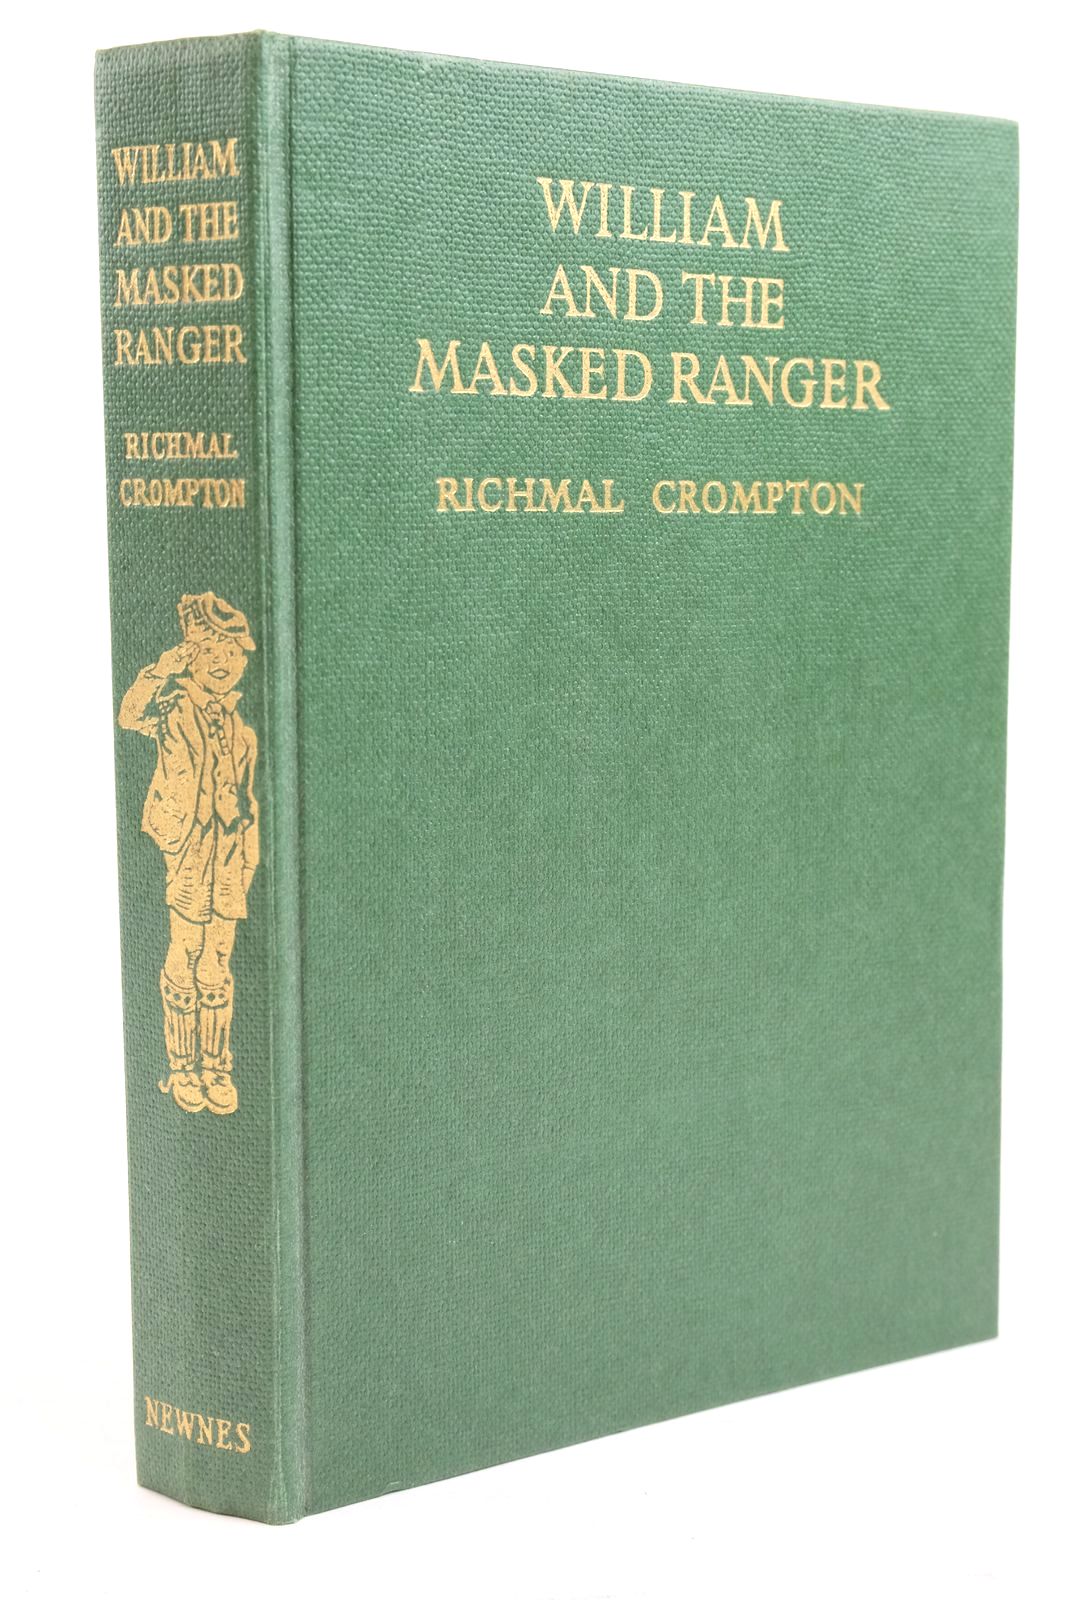 Photo of WILLIAM AND THE MASKED RANGER written by Crompton, Richmal illustrated by Ford, Henry published by George Newnes Ltd. (STOCK CODE: 1320874)  for sale by Stella & Rose's Books